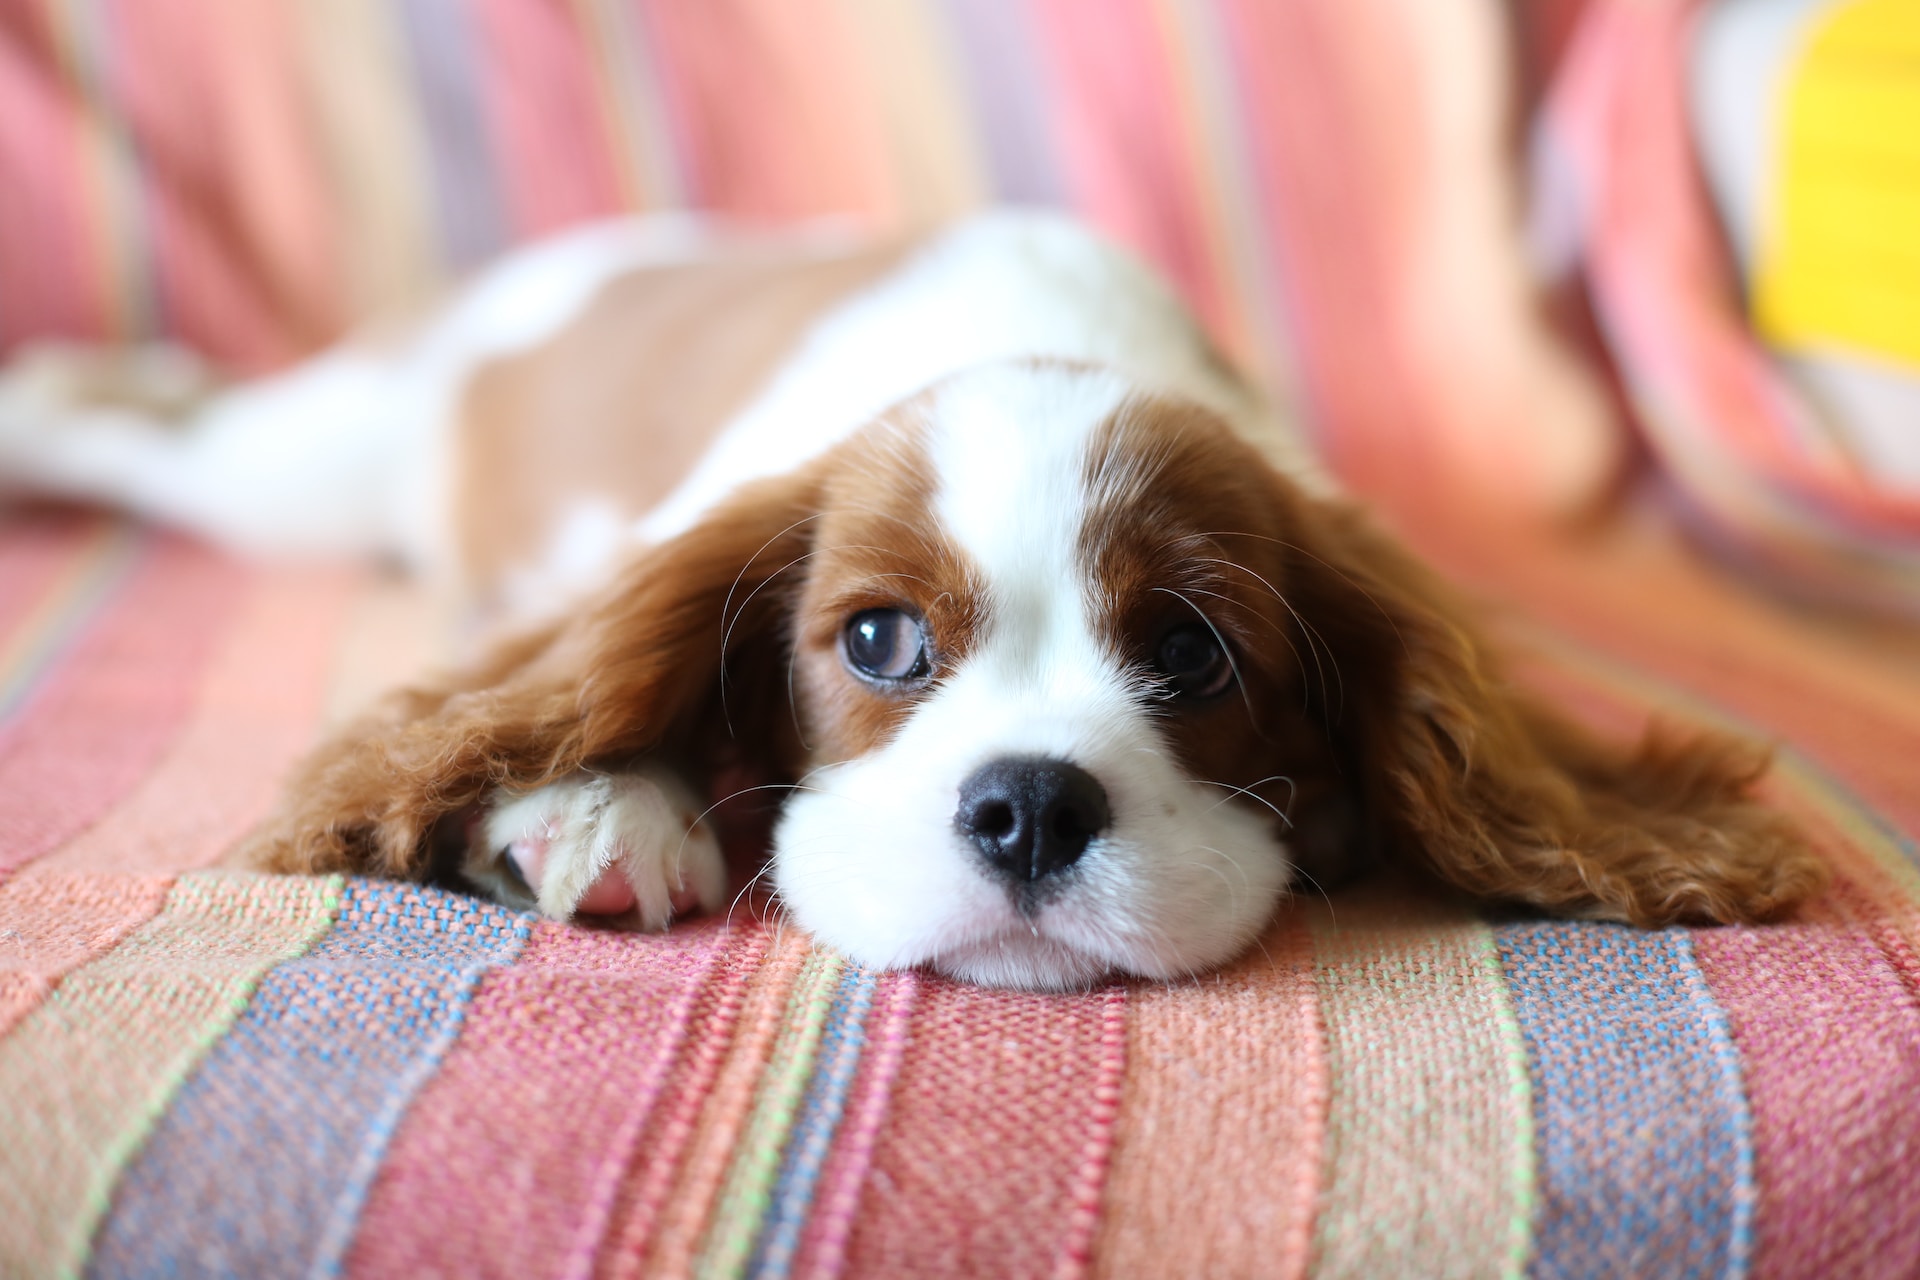 Cavalier King Charles Spaniel lying on red and white textile